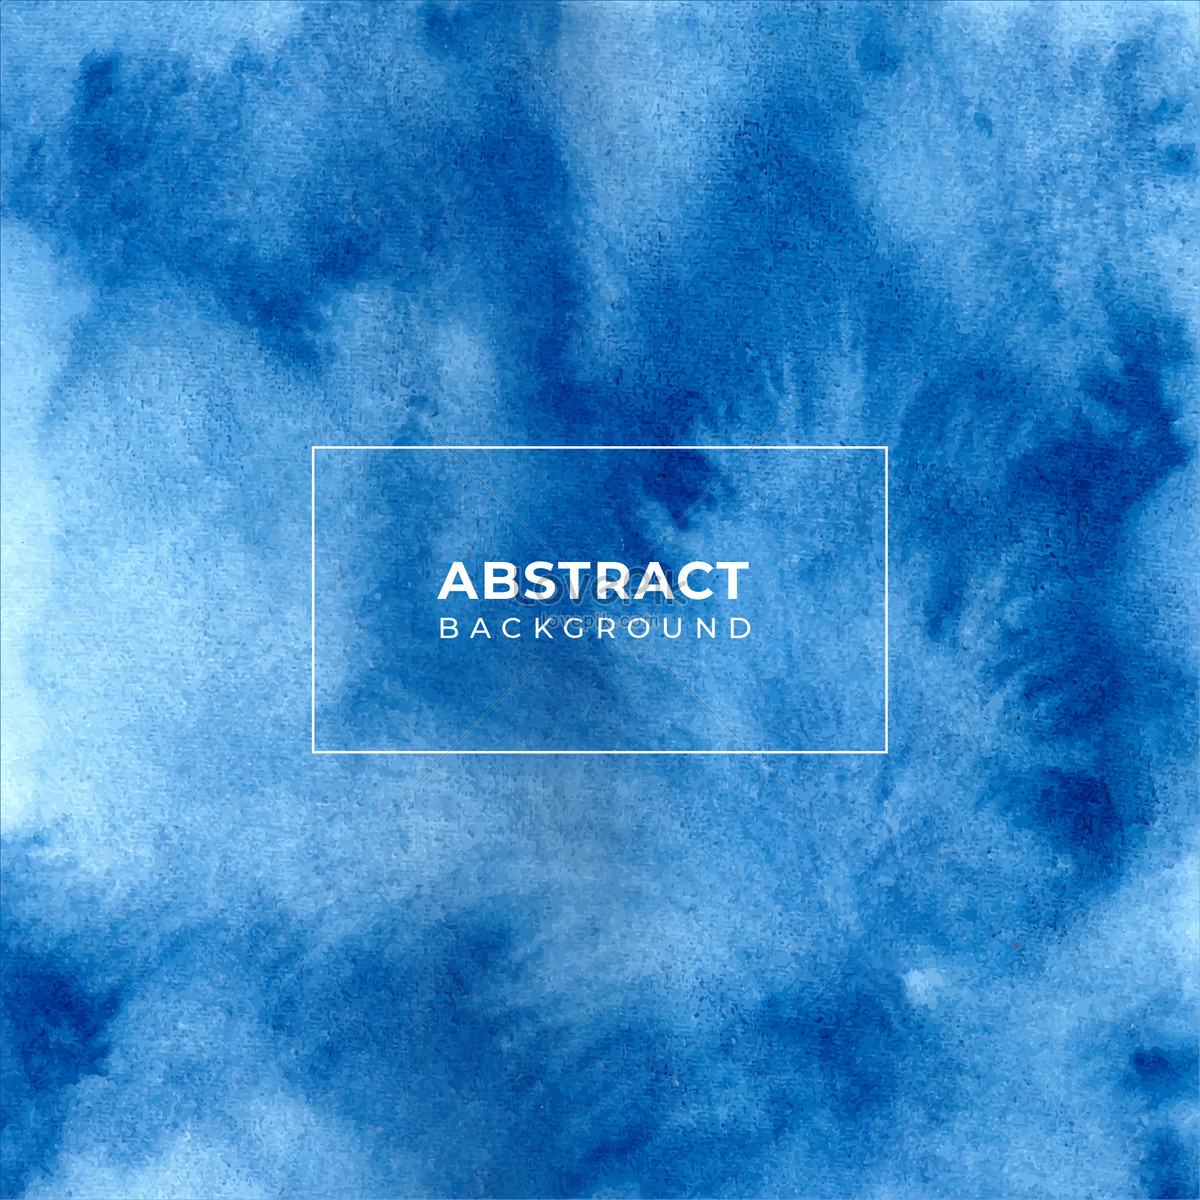 Sky Blue Abstract Watercolor Texture Banner Background Download Free |  Banner Background Image on Lovepik | 450042087